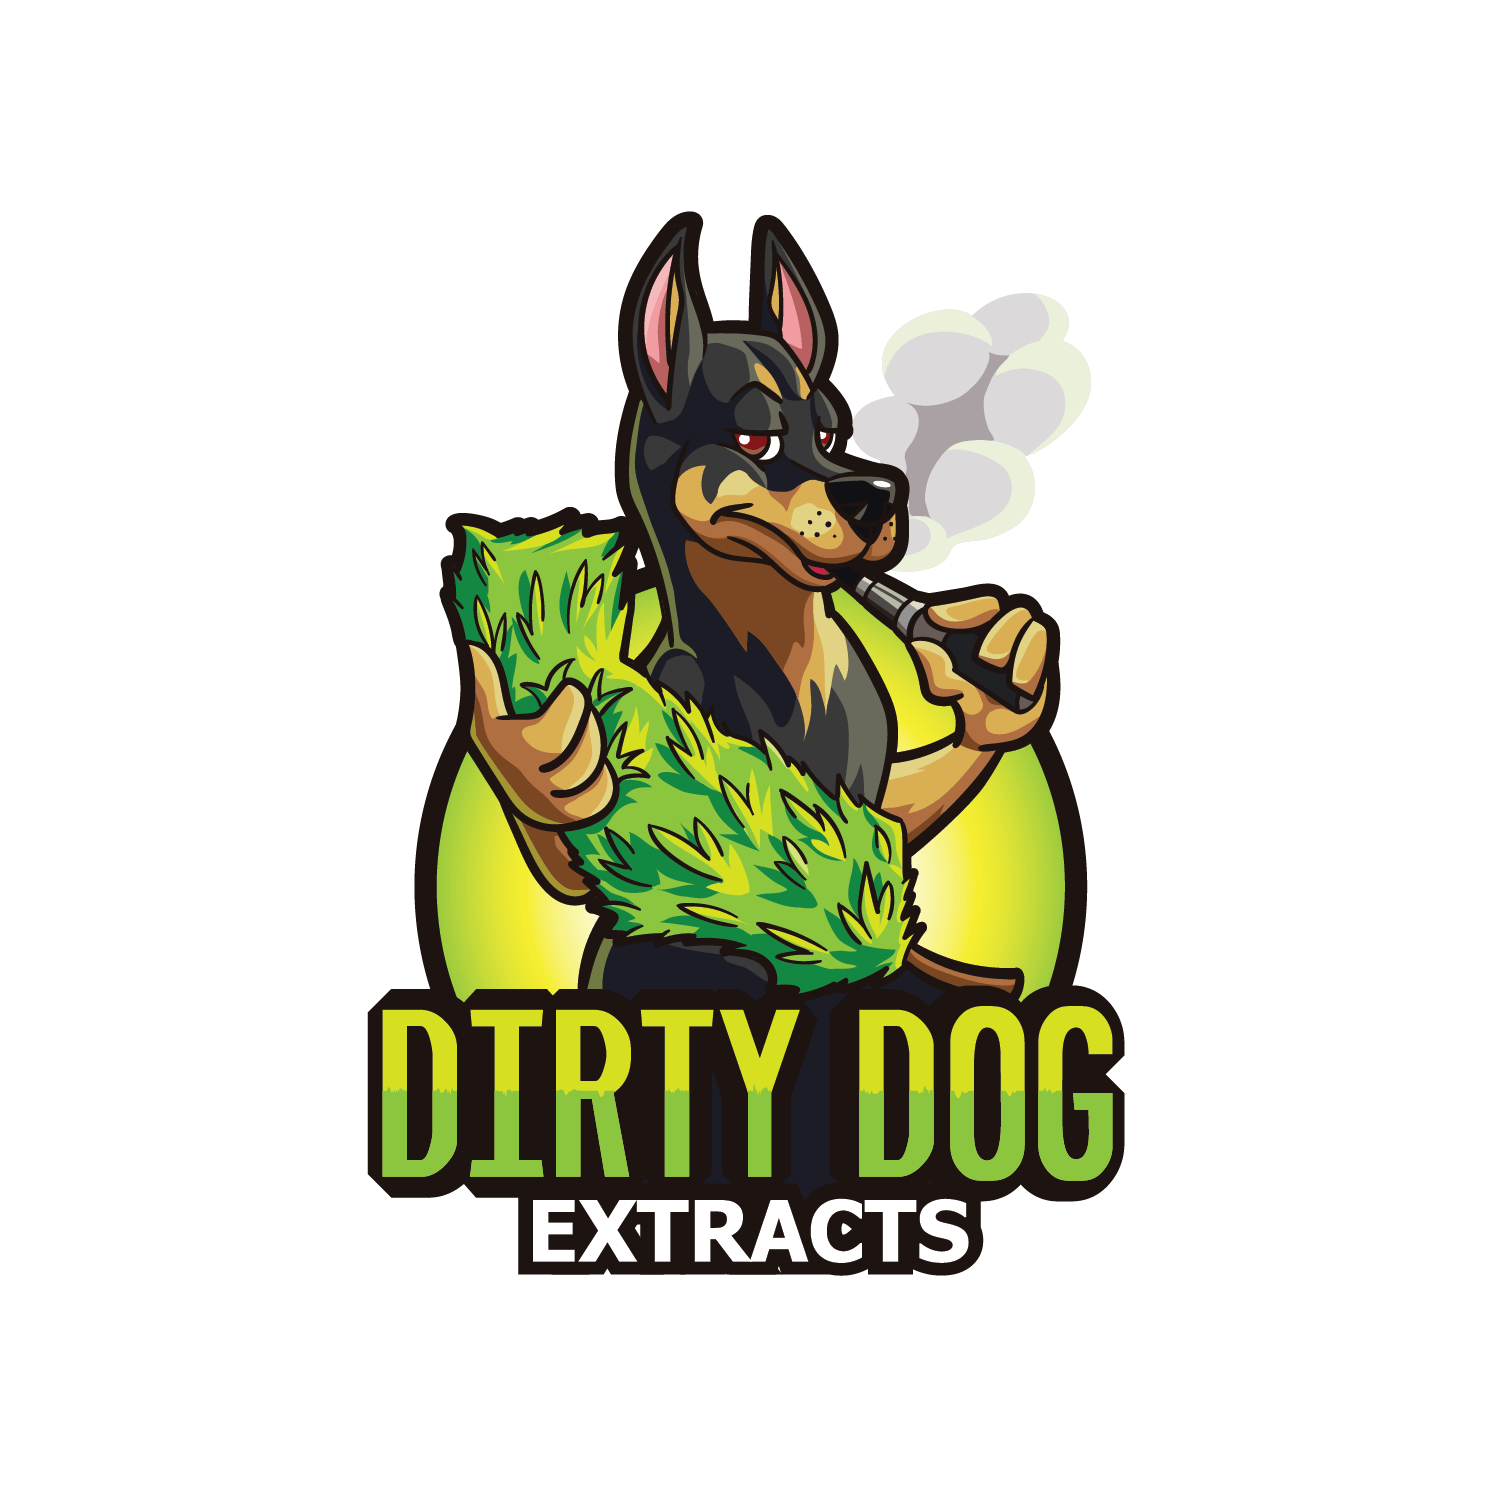 Medical Signs and Logo - Elegant, Playful, Medical Logo Design for Dirty Dog Extracts by B ...